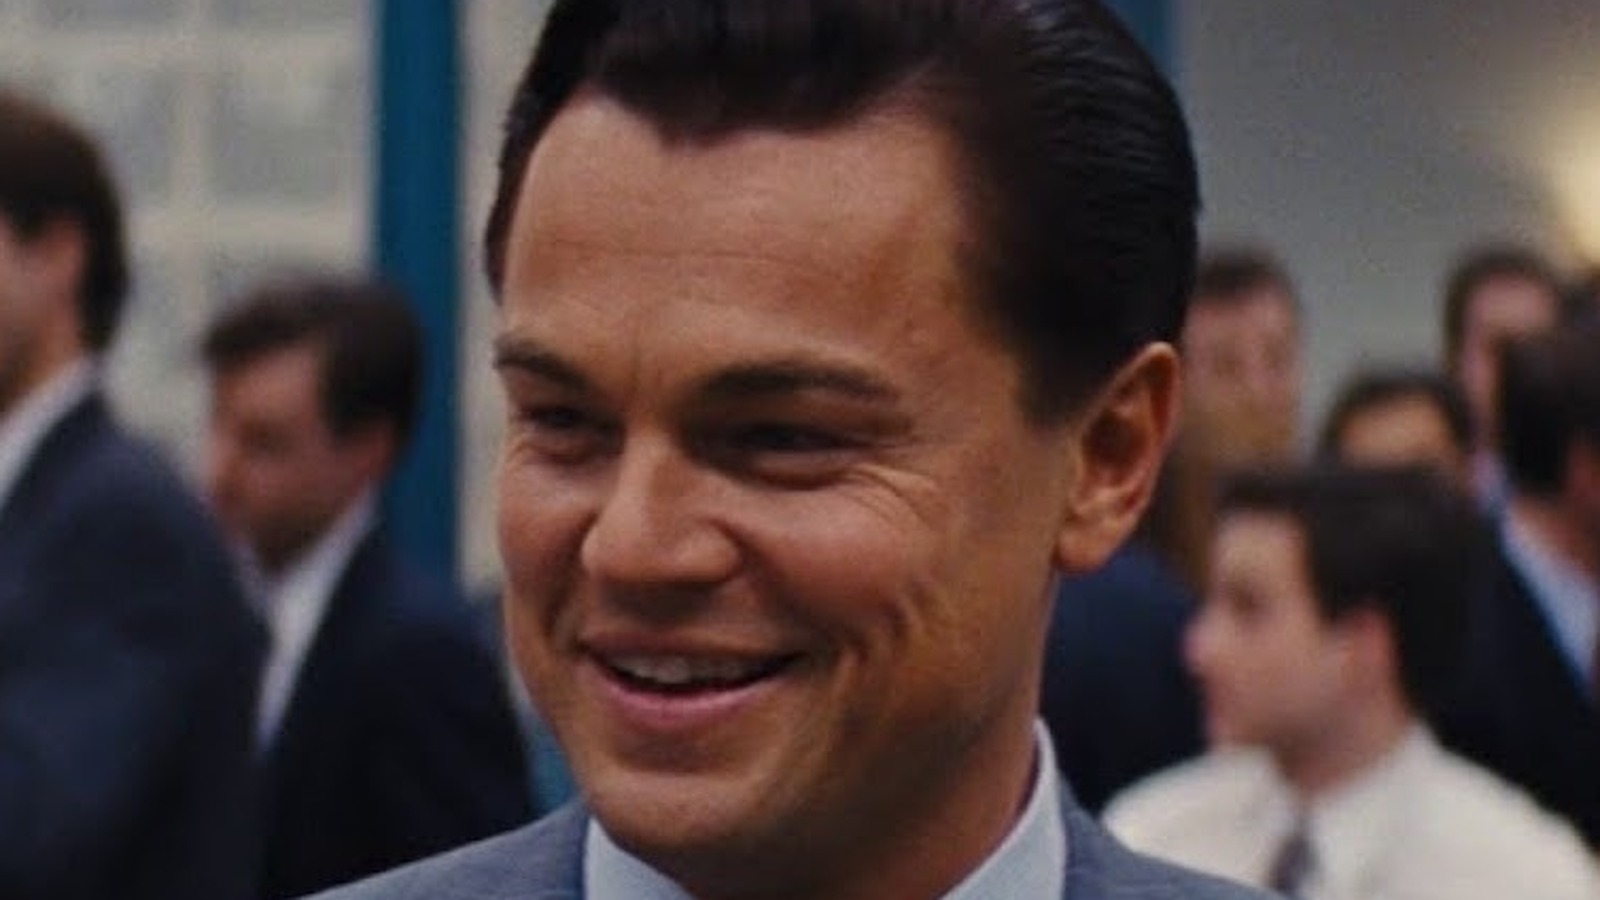 How Historically Accurate Is The Movie The Wolf Of Wall Street?